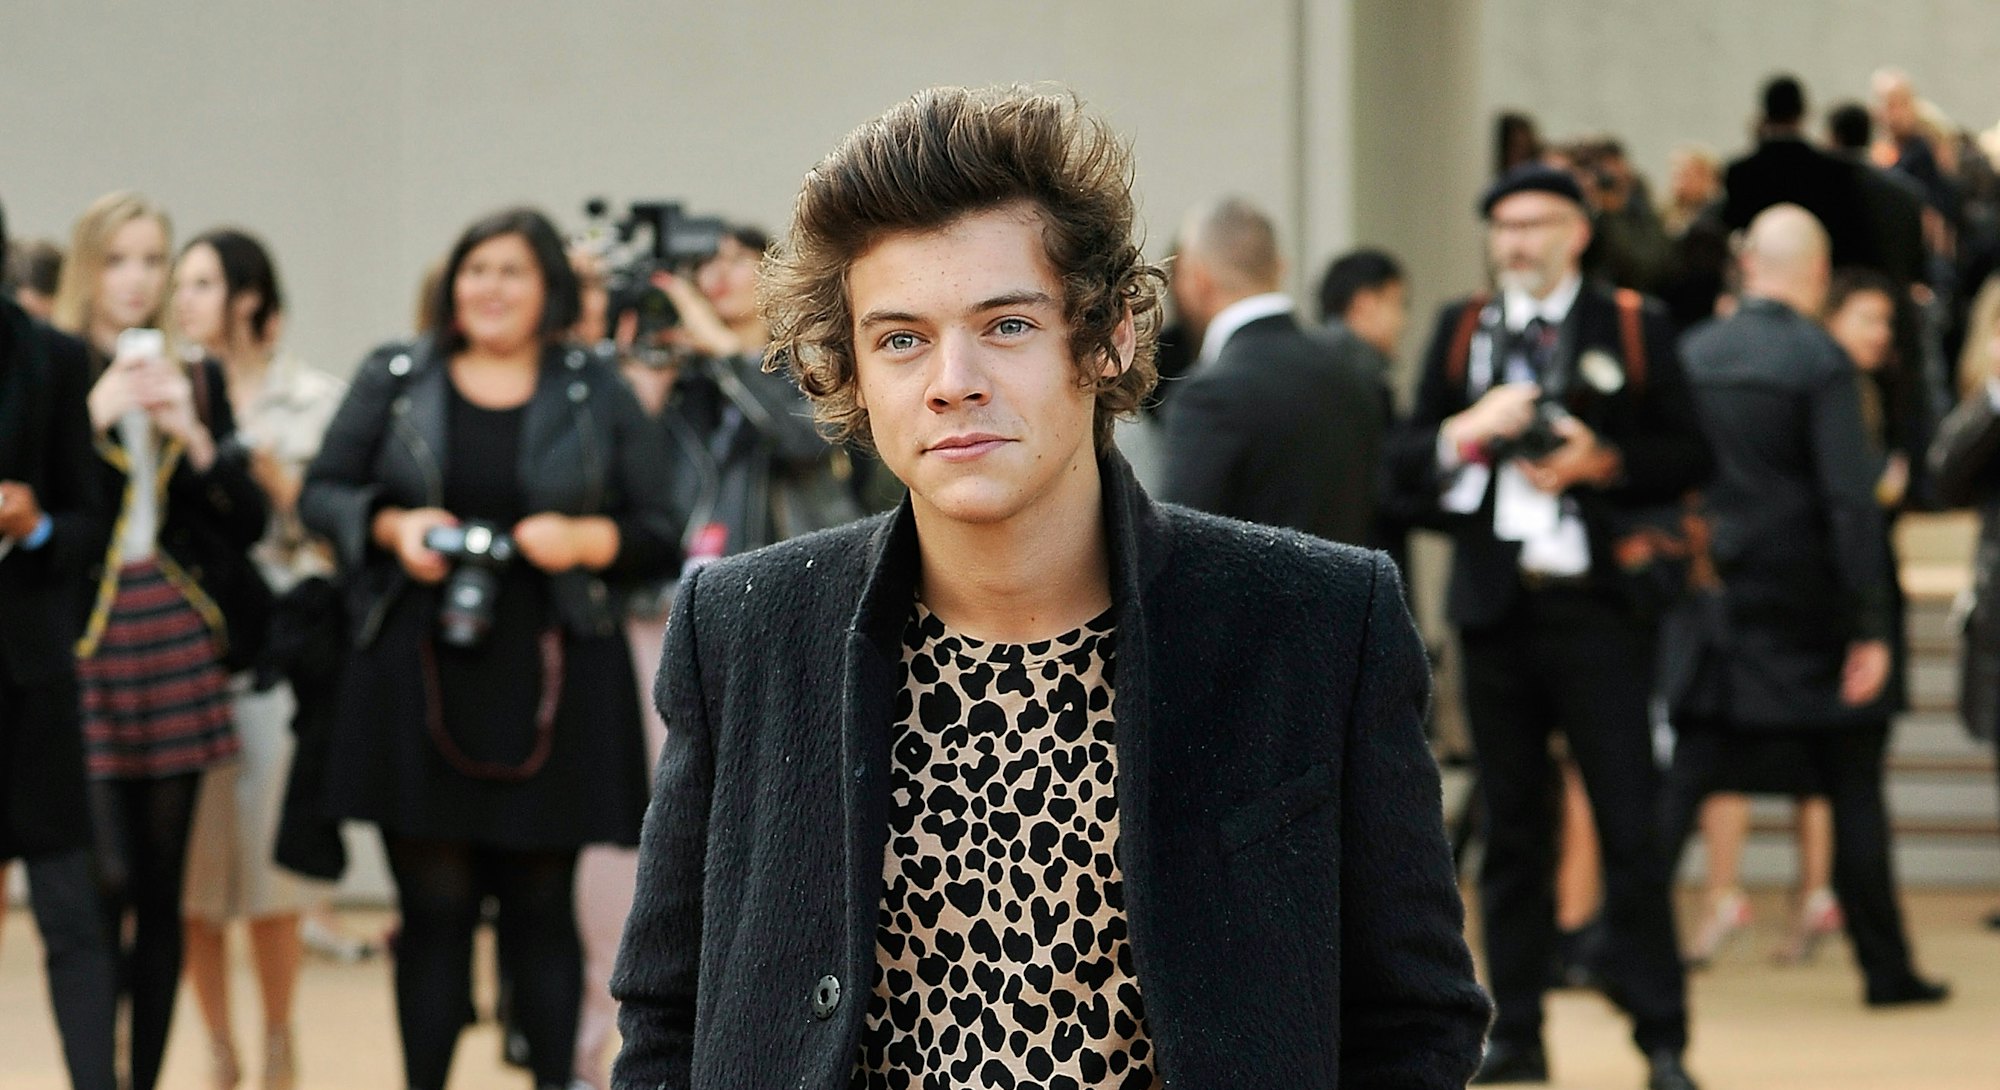 Harry Styles embraces '90s fashion trends with a wardrobe full of retro looks.